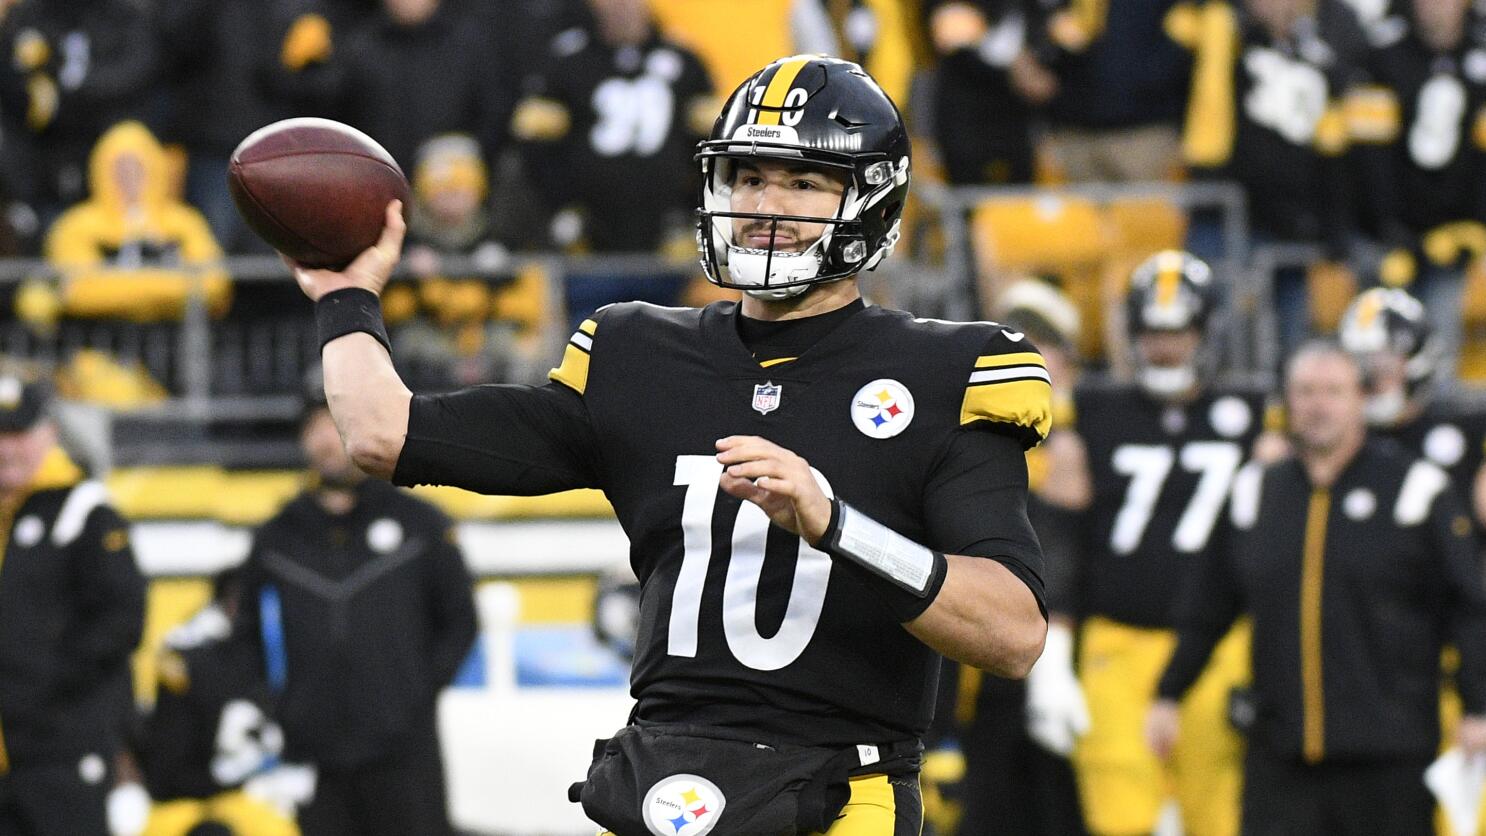 Trubisky starts at QB for Steelers with Kenny Pickett out - The